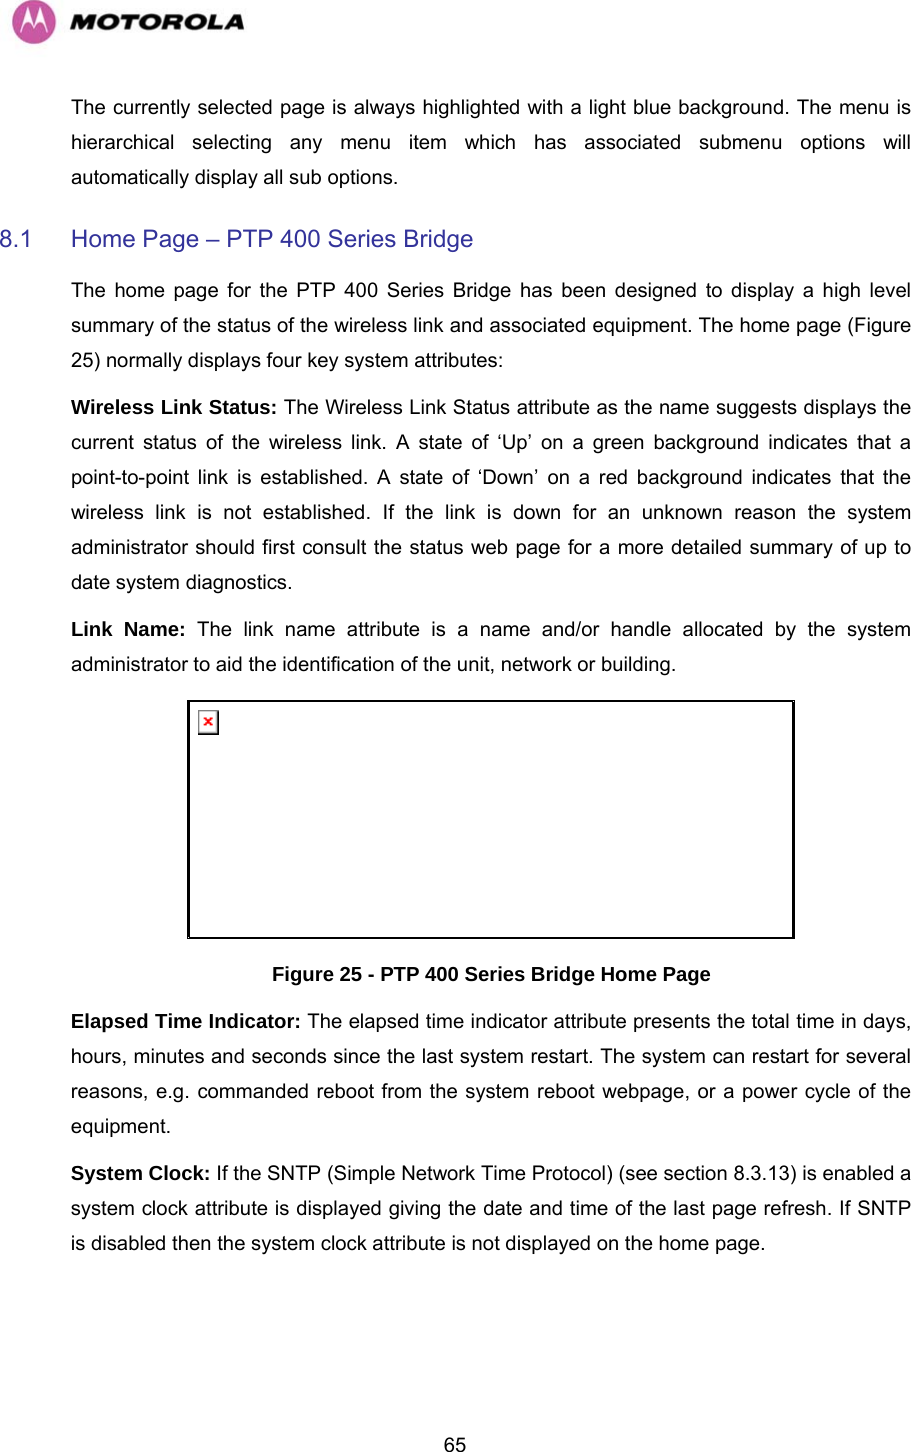   65The currently selected page is always highlighted with a light blue background. The menu is hierarchical selecting any menu item which has associated submenu options will automatically display all sub options. 8.1  Home Page – PTP 400 Series Bridge The home page for the PTP 400 Series Bridge has been designed to display a high level summary of the status of the wireless link and associated equipment. The home page (Figure 25) normally displays four key system attributes: Wireless Link Status: The Wireless Link Status attribute as the name suggests displays the current status of the wireless link. A state of ‘Up’ on a green background indicates that a point-to-point link is established. A state of ‘Down’ on a red background indicates that the wireless link is not established. If the link is down for an unknown reason the system administrator should first consult the status web page for a more detailed summary of up to date system diagnostics.  Link Name: The link name attribute is a name and/or handle allocated by the system administrator to aid the identification of the unit, network or building.   Figure 25 - PTP 400 Series Bridge Home Page Elapsed Time Indicator: The elapsed time indicator attribute presents the total time in days, hours, minutes and seconds since the last system restart. The system can restart for several reasons, e.g. commanded reboot from the system reboot webpage, or a power cycle of the equipment.  System Clock: If the SNTP (Simple Network Time Protocol) (see section 8.3.13) is enabled a system clock attribute is displayed giving the date and time of the last page refresh. If SNTP is disabled then the system clock attribute is not displayed on the home page. 